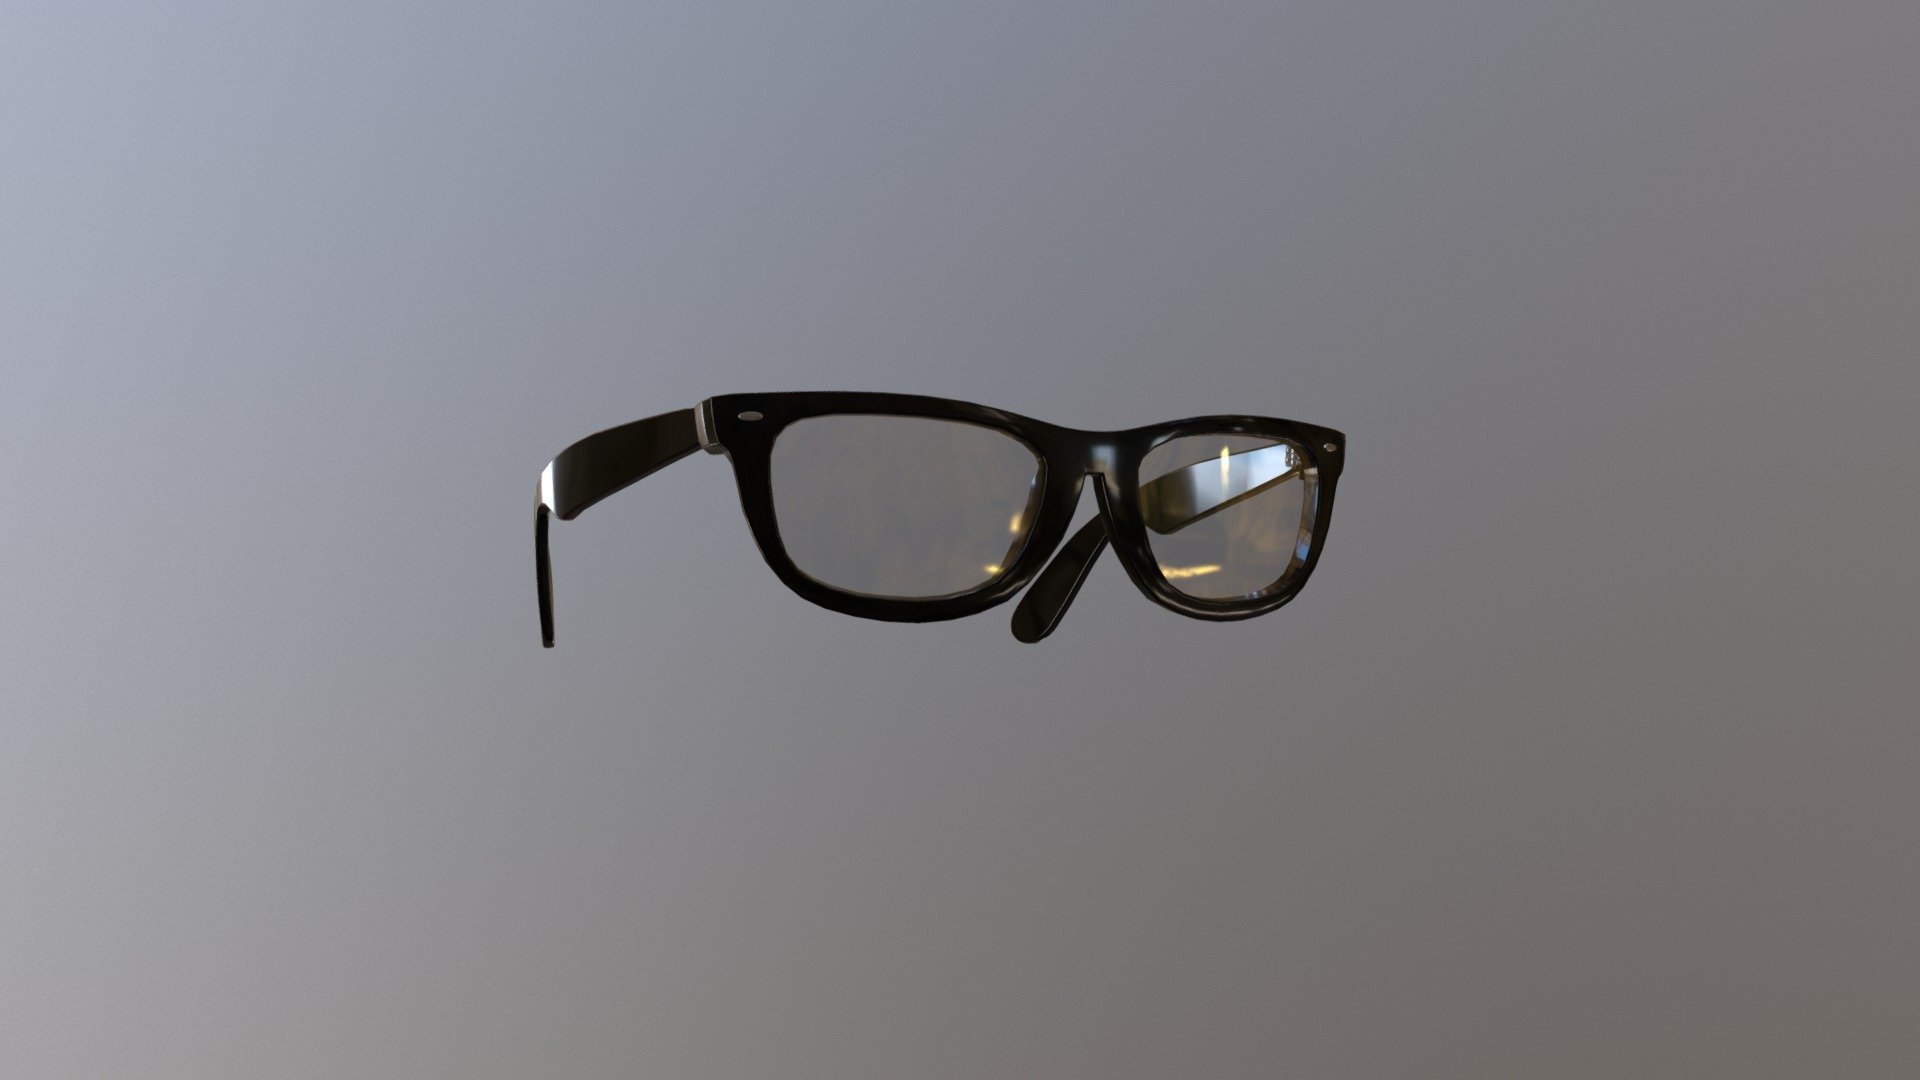 Glasses Low Poly Model Download Download Free 3d Model By Pervertex